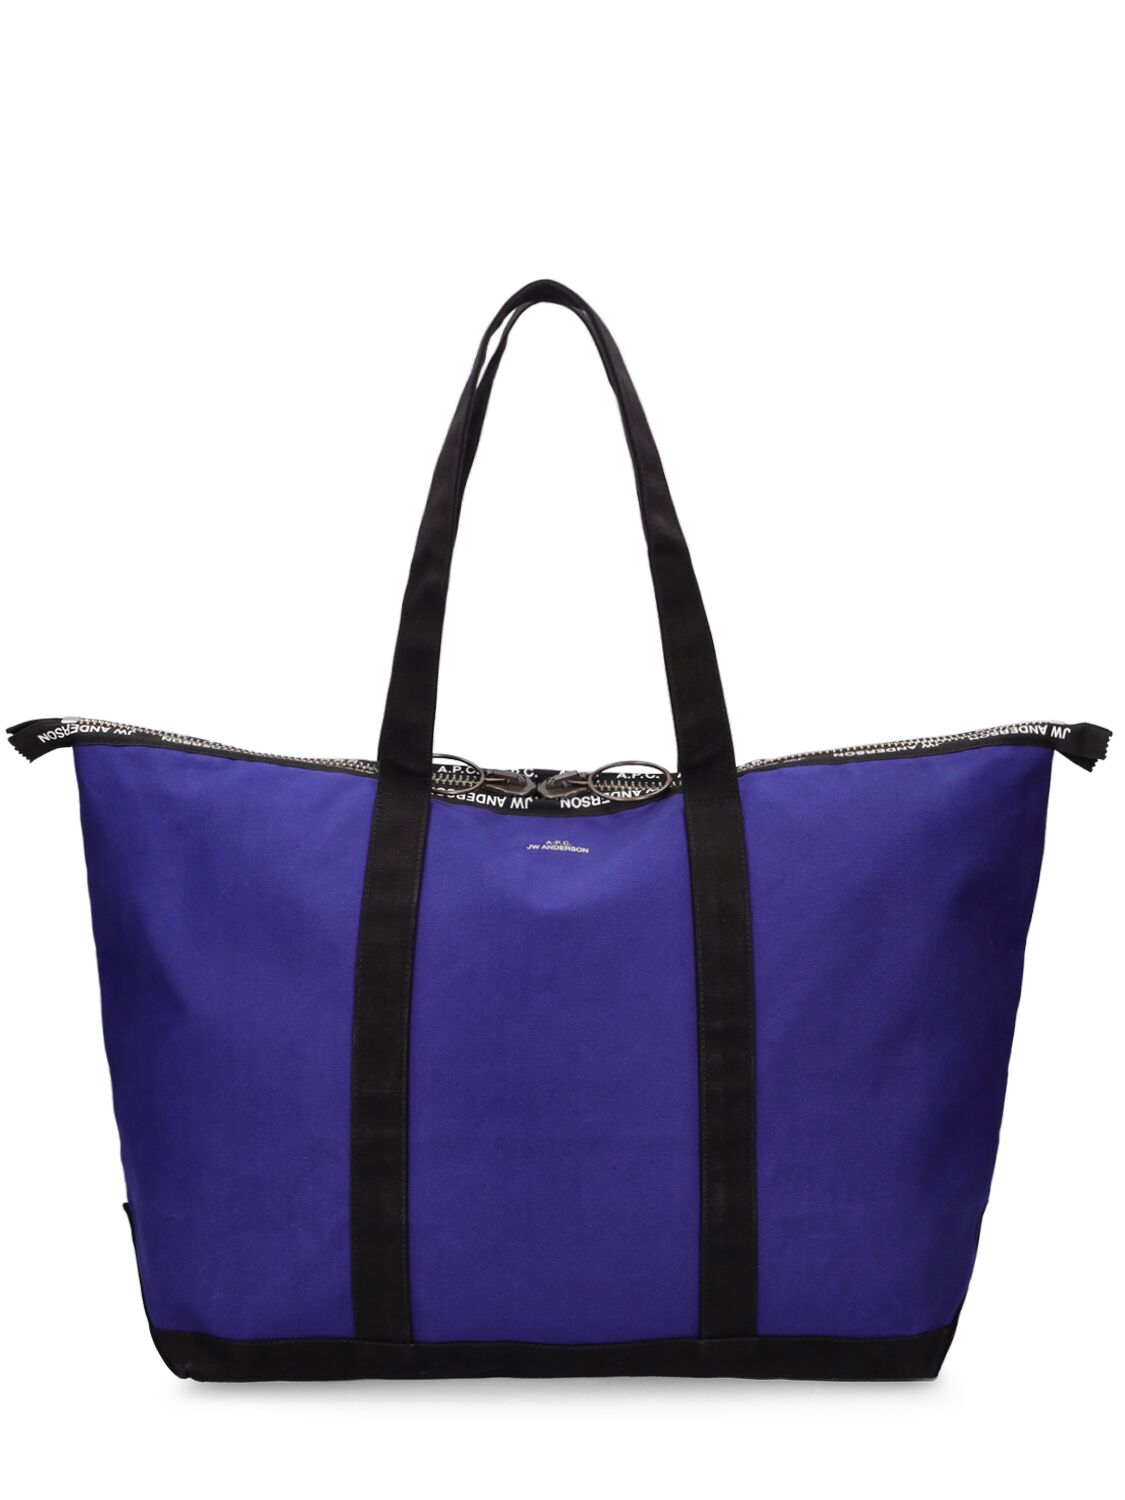 A.p.c. X Jw Anderson Tote Bag In Blue